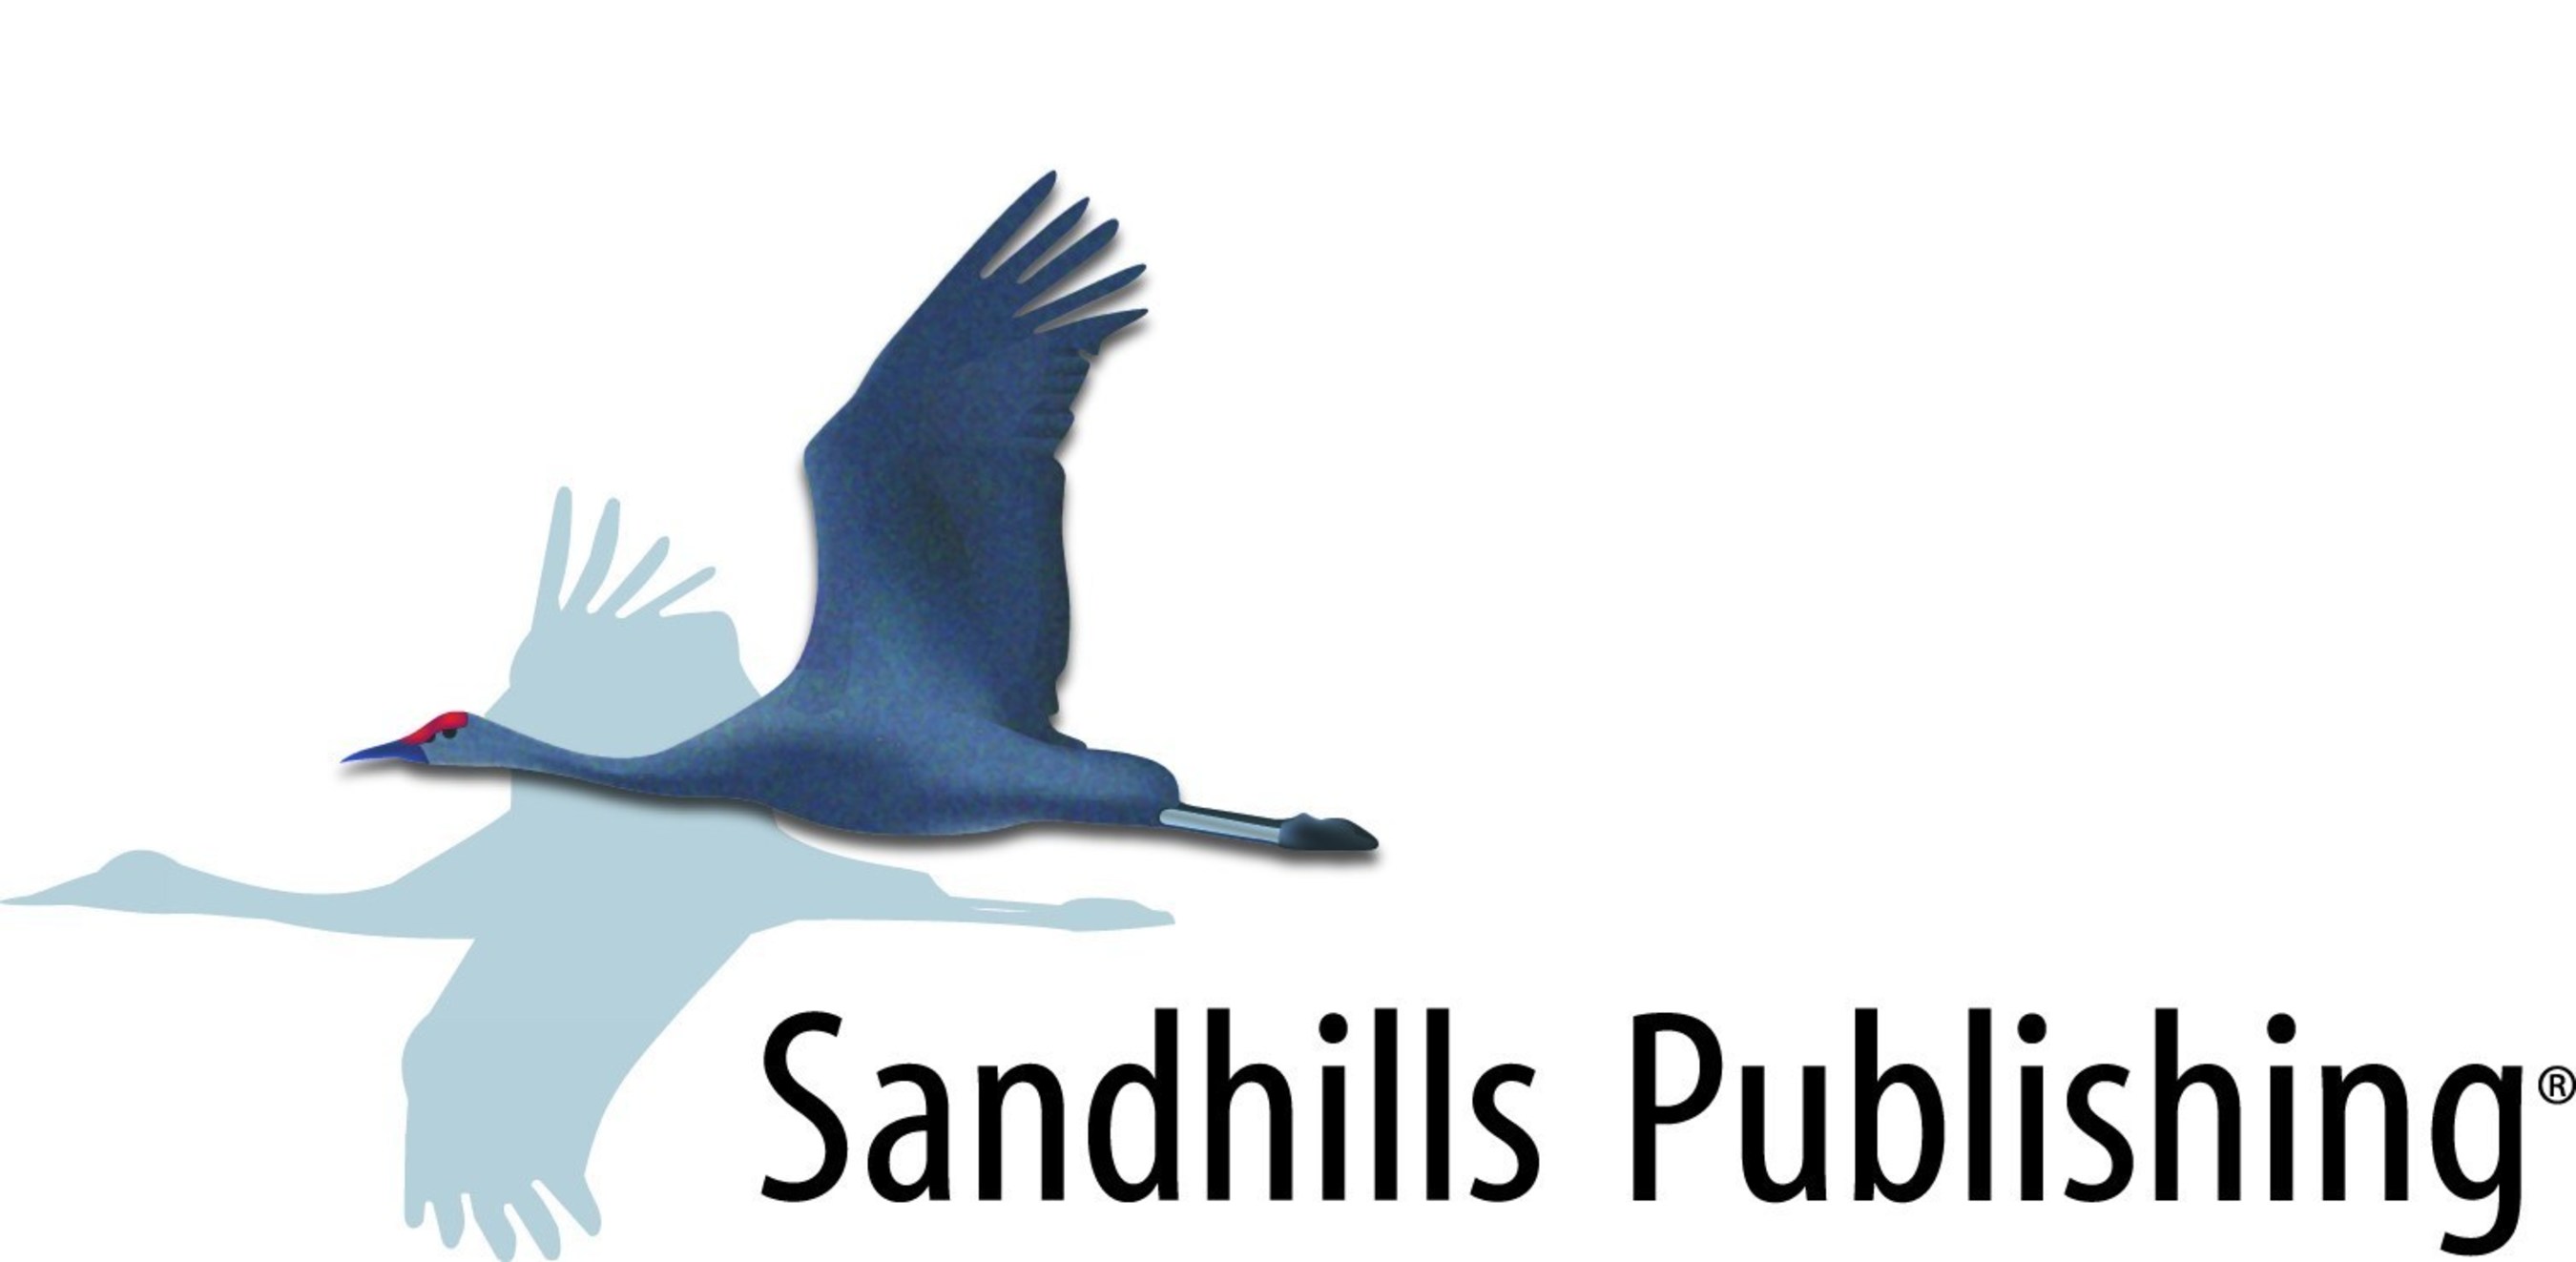 Sandhills Publishing - we are the cloud.